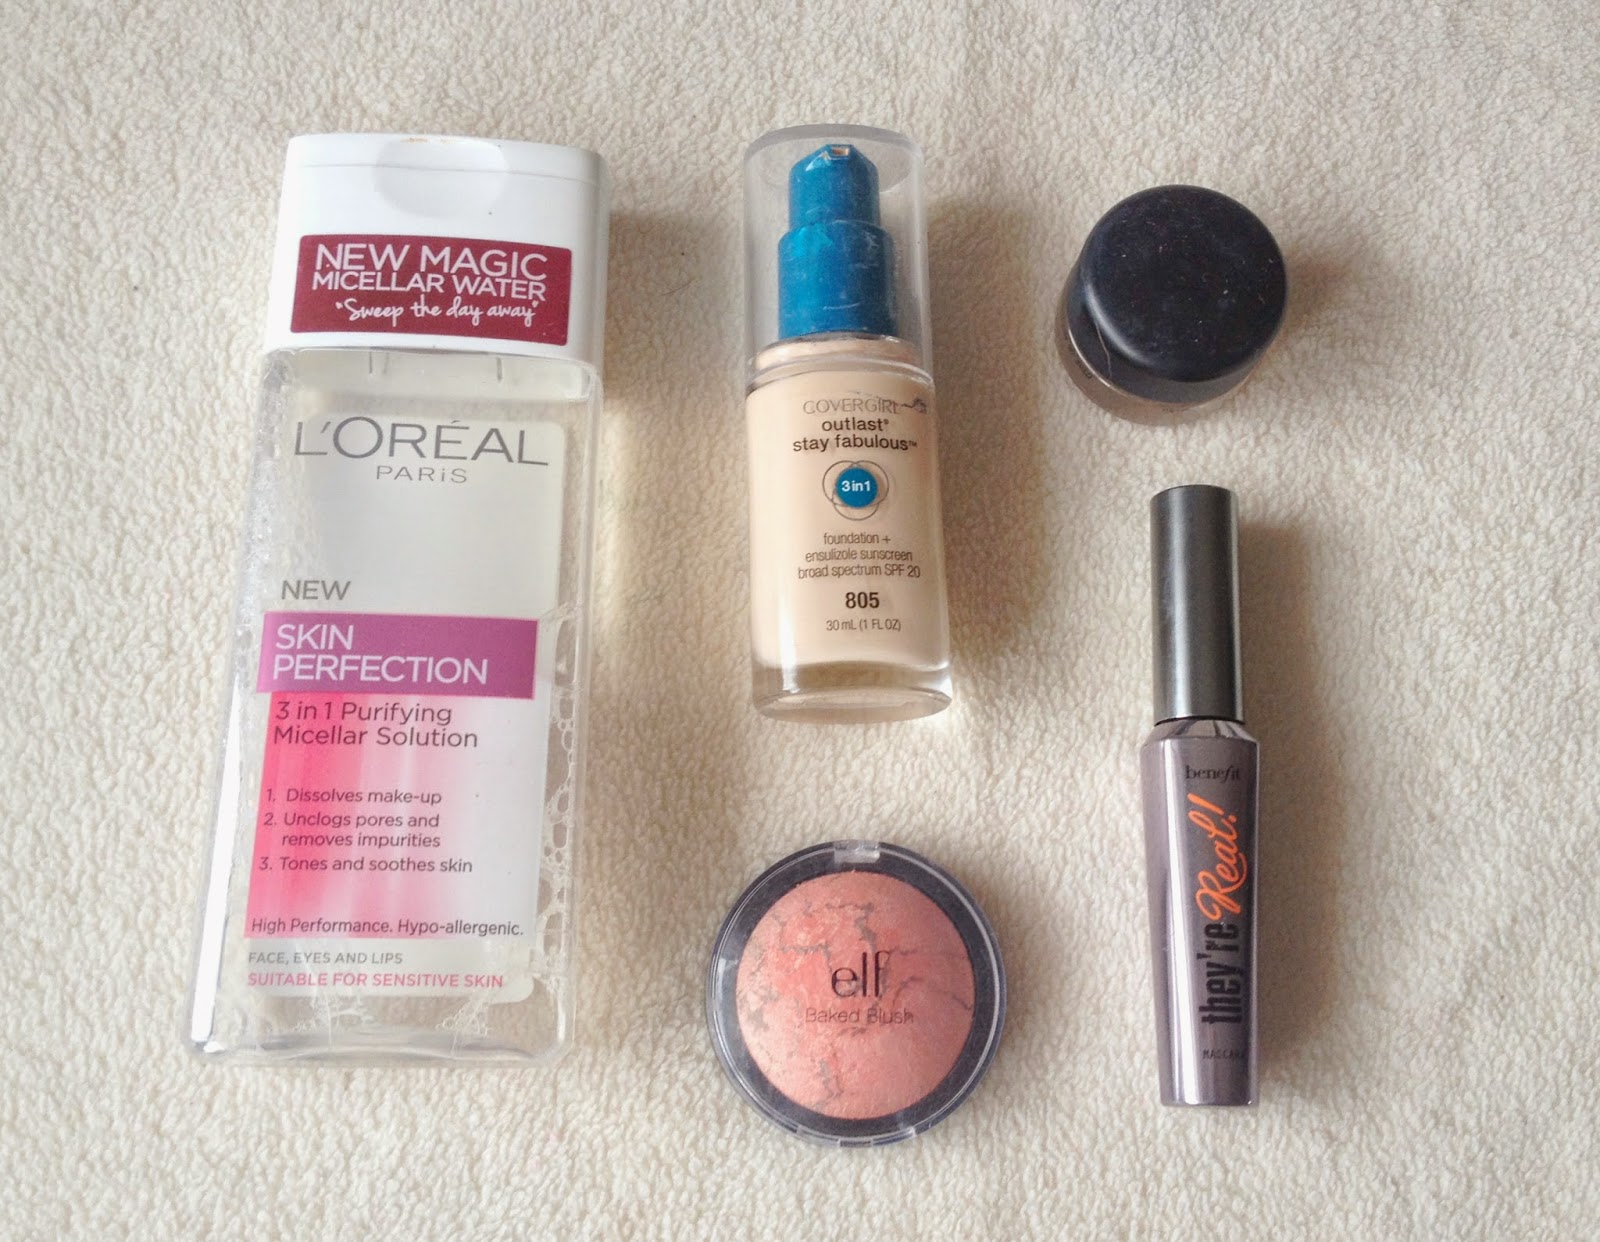 August Favourites - L'Oreal Micellar Water, Benefit They're Real, Covergirl Outlast Foundation, MAC Bare Study Paintpot, Elf Baked Blush in Peachy Cheeky